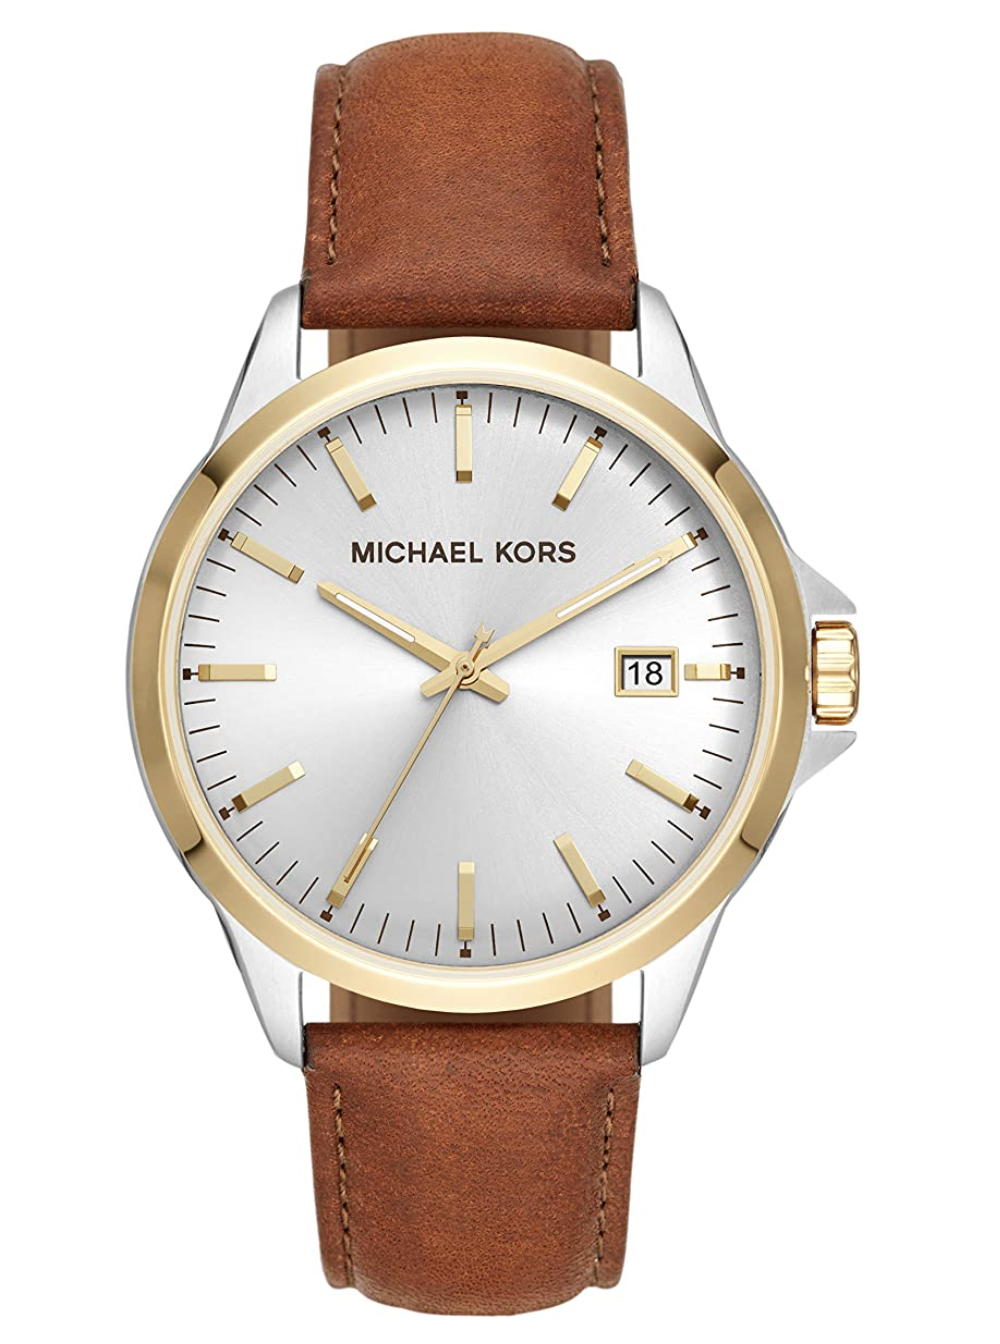 Michael Kors Men's Penn Stainless Steel Quartz Watch with Leather Strap, Brown